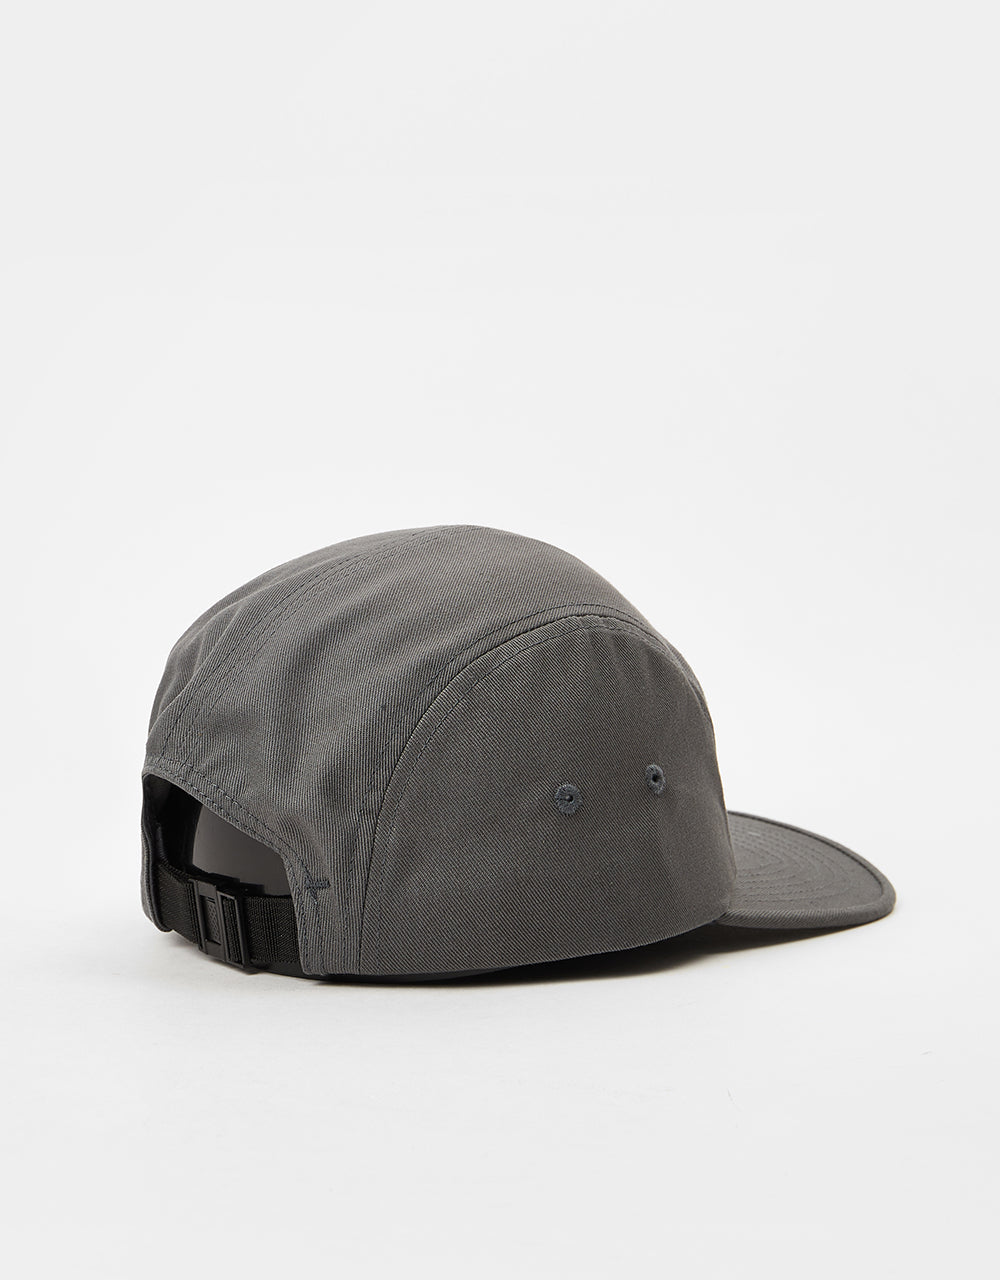 Route One 5 Panel Cap - Charcoal